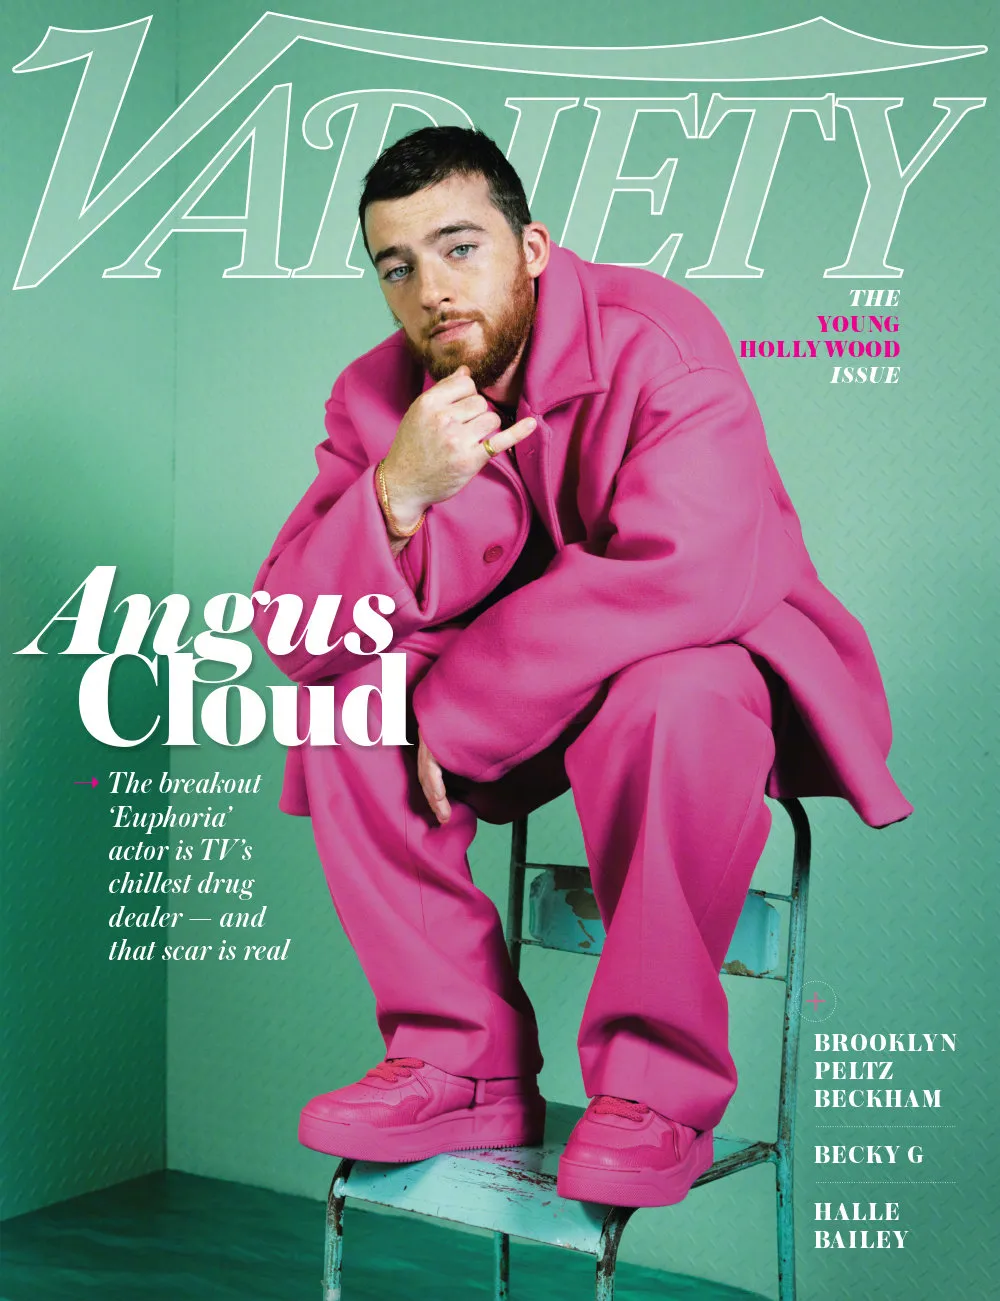 Angus Cloud, 'Variety' Magazine 'The Young Hollywood Issue' Photo | FMV6